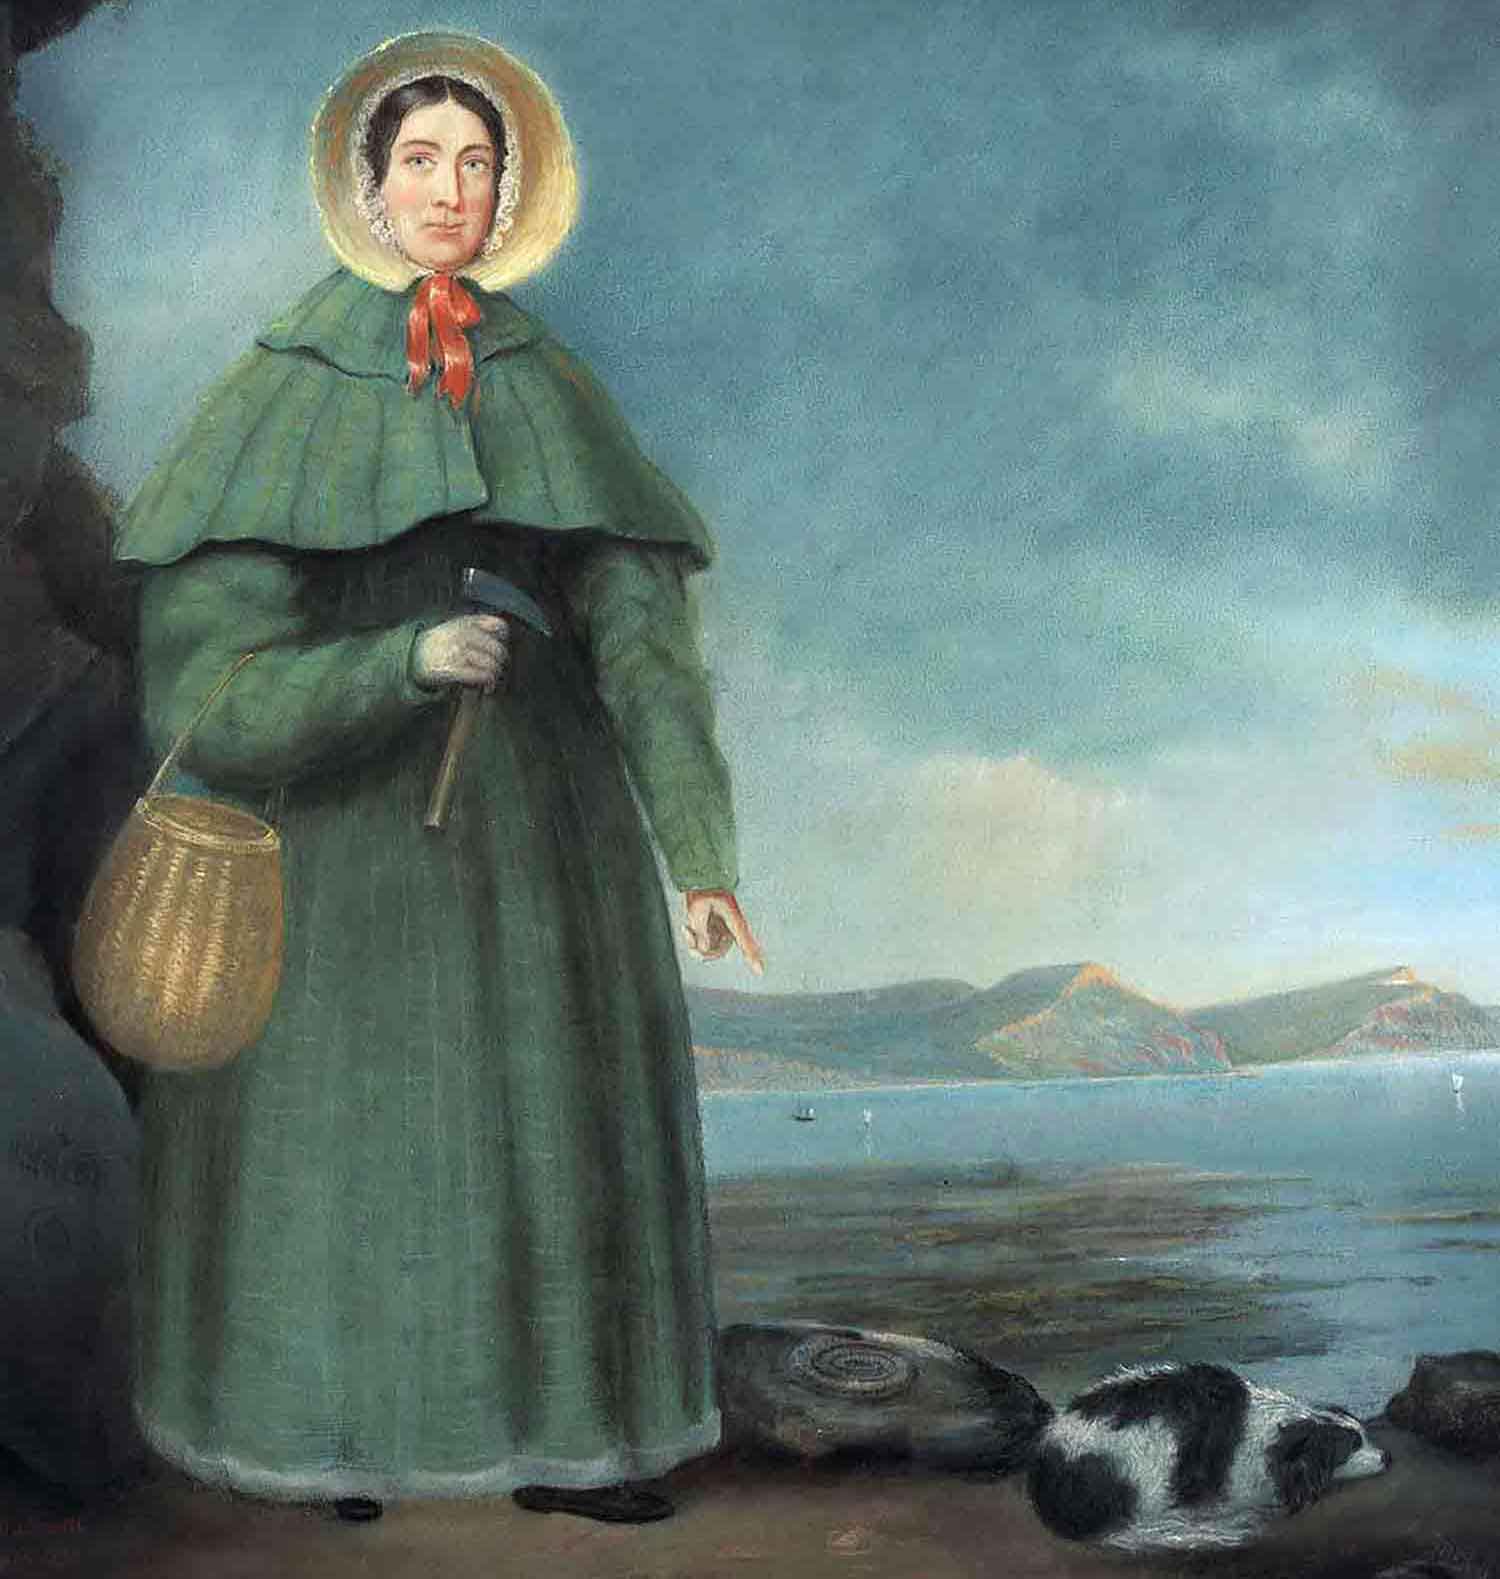 Mary Anning holds a digging tool and points to a fossil as she stands next to her dog.